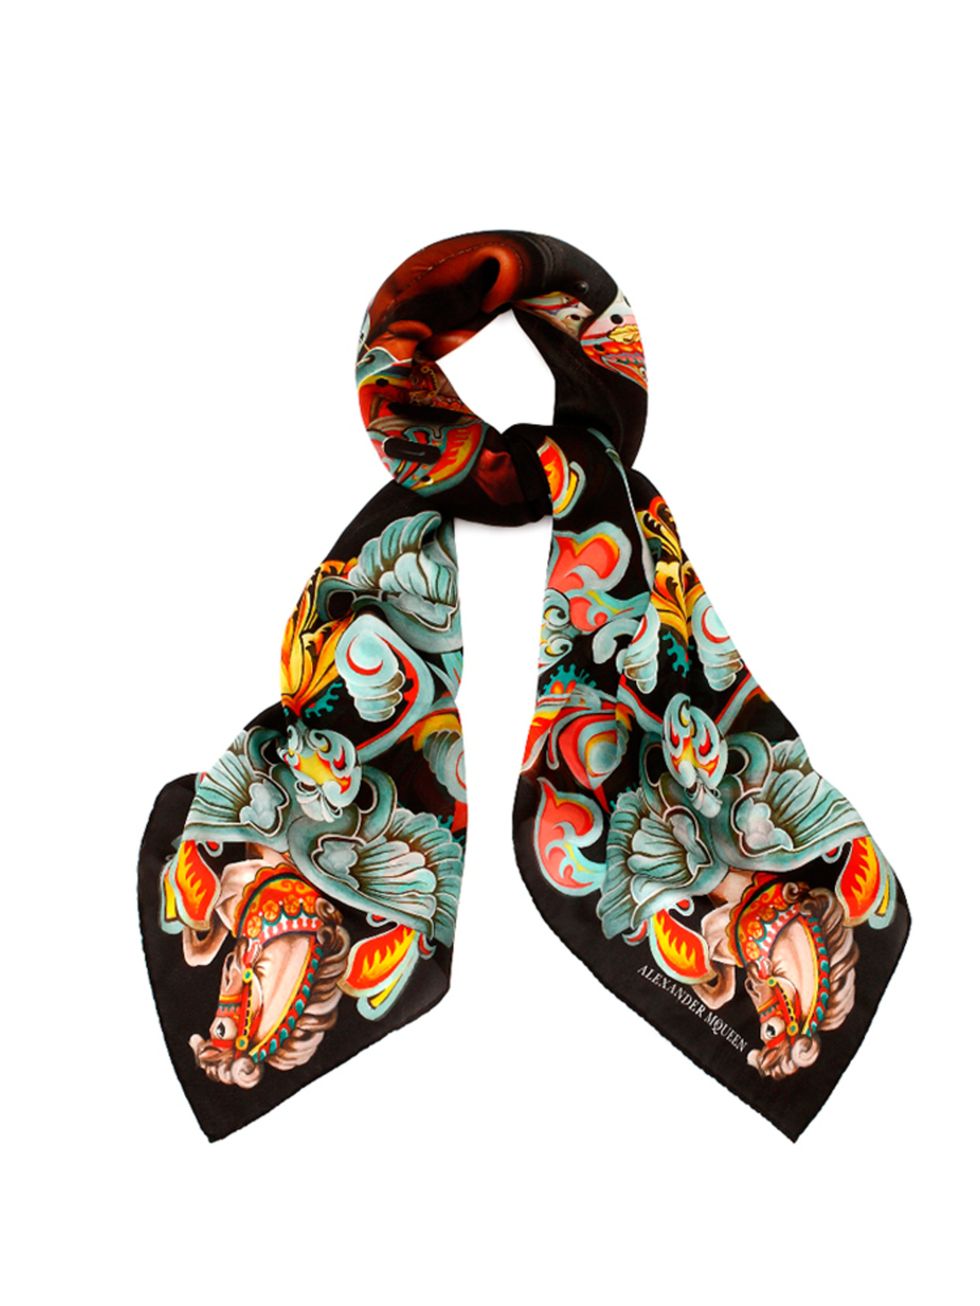 <p><a href="http://www.alexandermcqueen.com/gb/alexandermcqueen/special-edition-scarf_cod46391973st.html" target="_blank">Alexander McQueen</a> limited edition scarf for the V&A 'Savage Beauty' exhibition, £345</p>